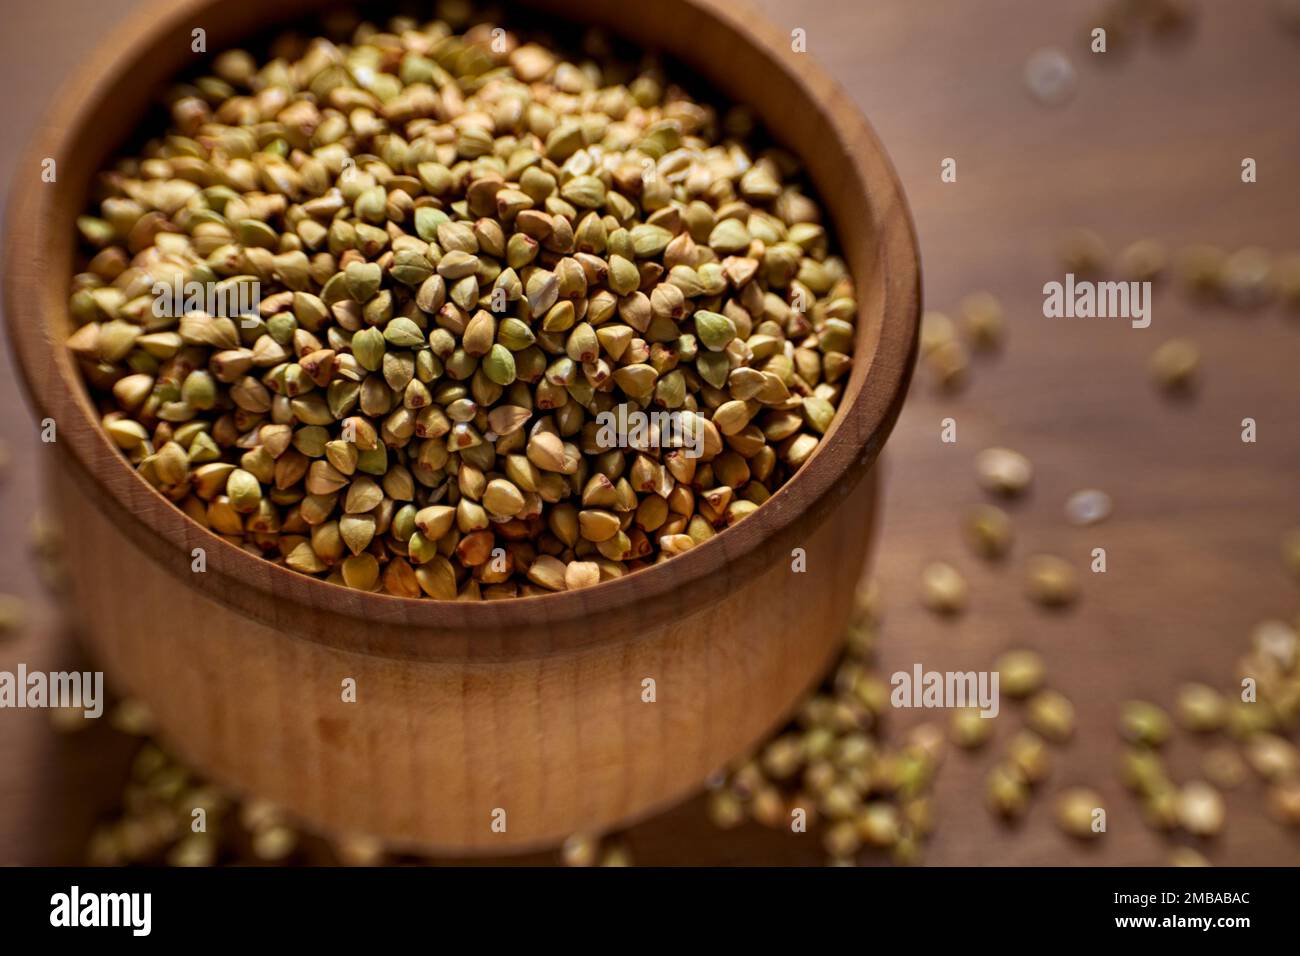 Unprocessed green buckwheat in a wooden bowl on a wooden board. Stock Photo